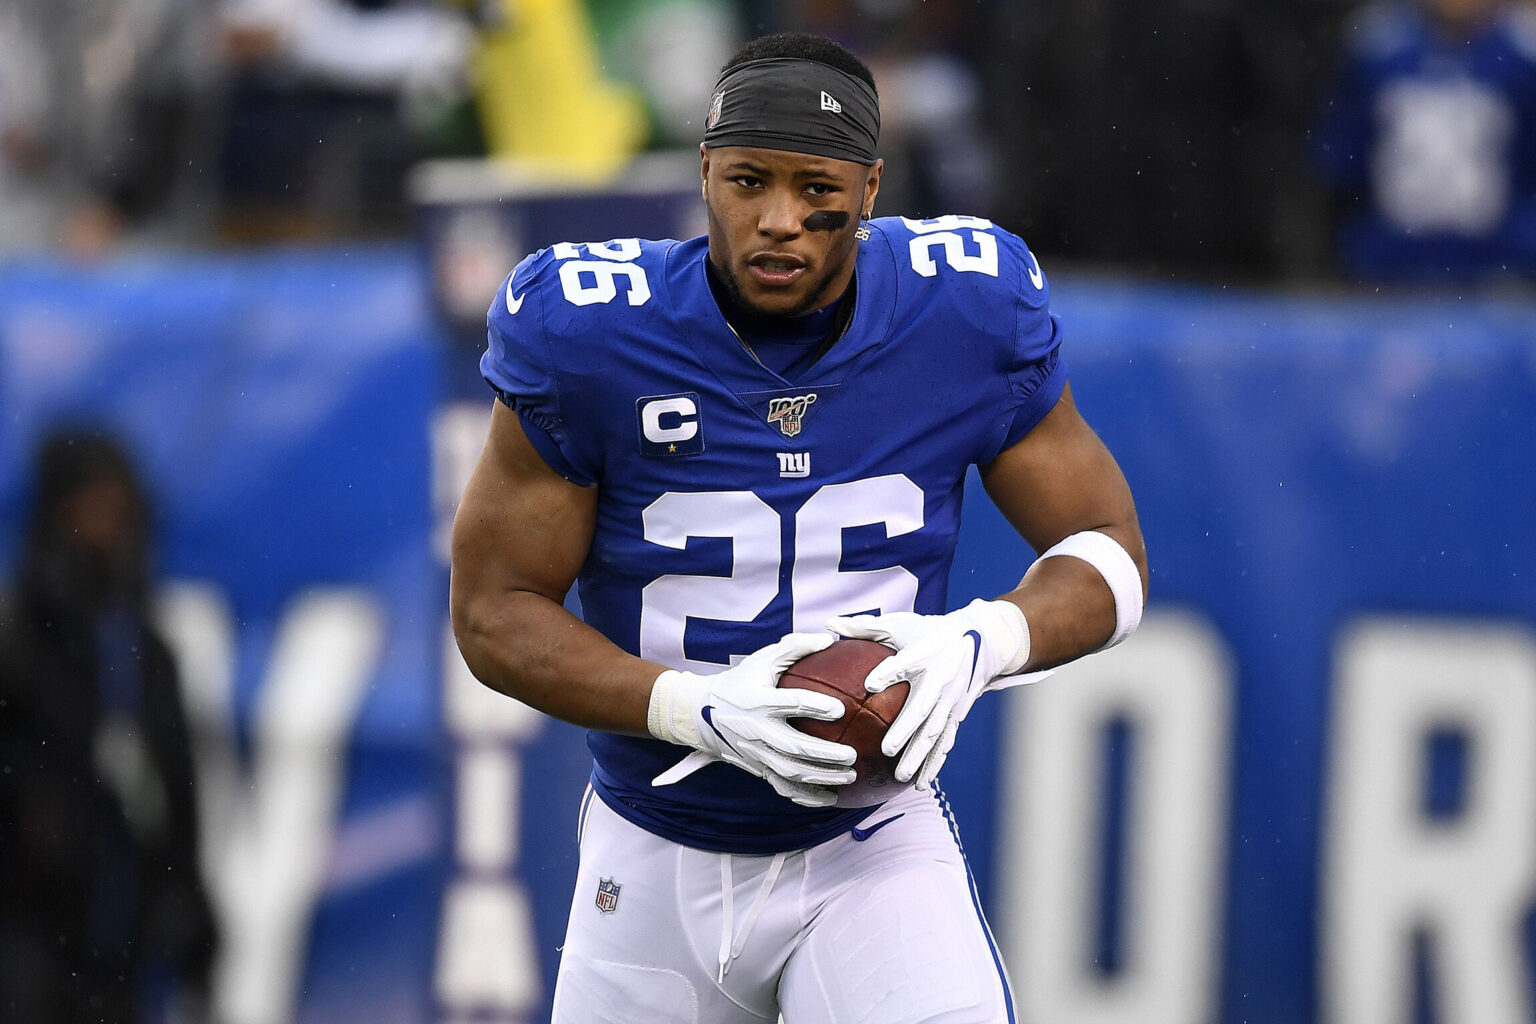 The New York Giants had an abysmal season opener against the Pittsburgh Steelers, and the stats are pointing out Saquon Barkley is the weak link.